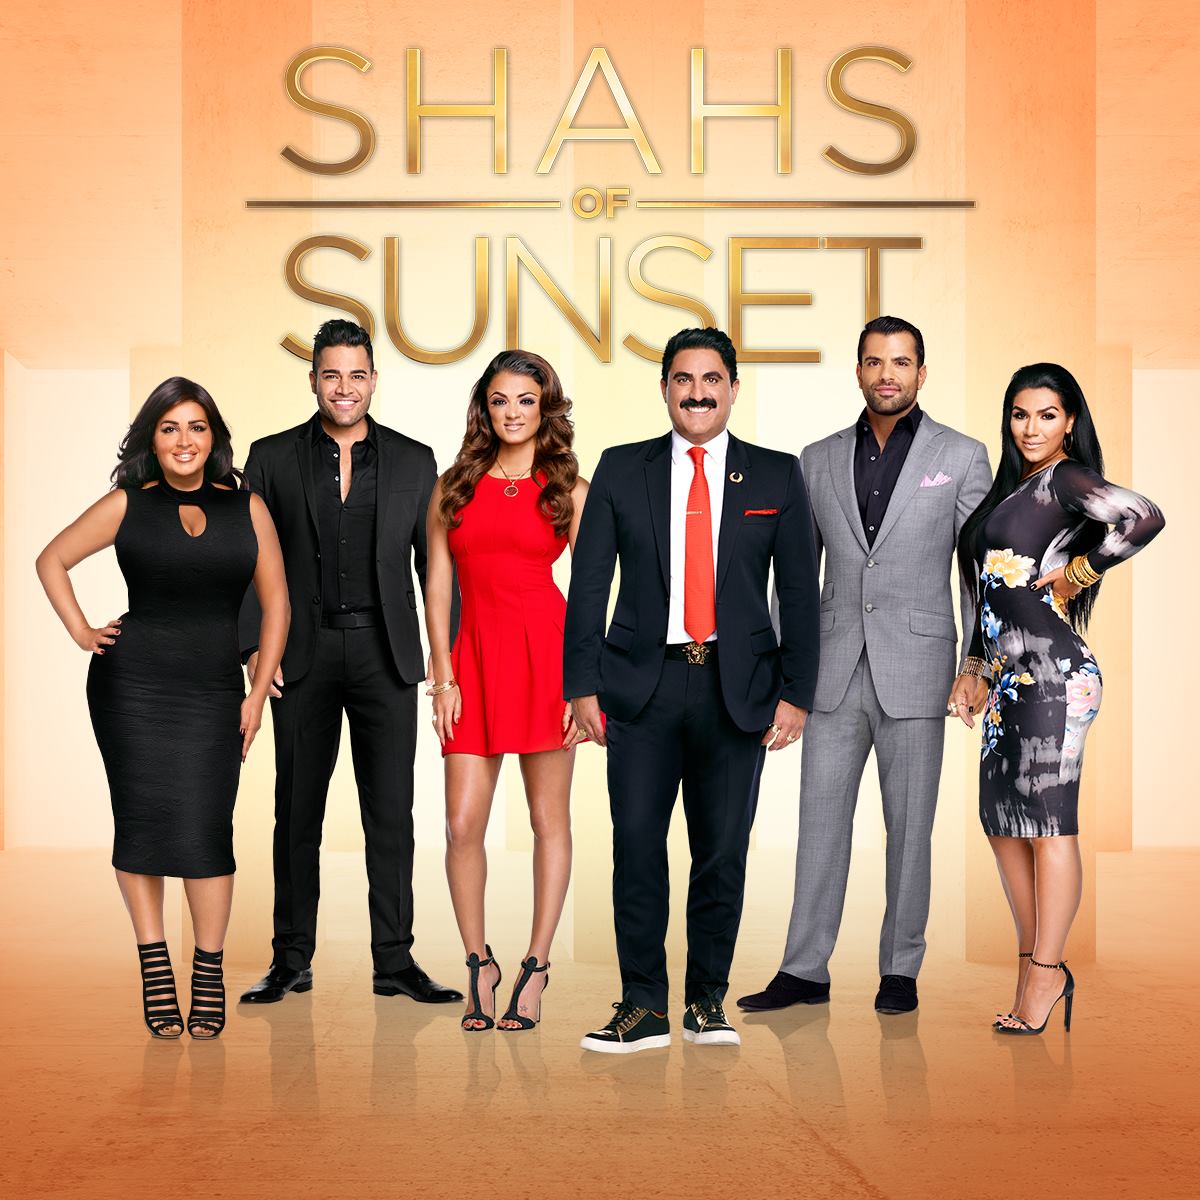 Watch 'Shahs of Sunset' Season 5 episode 11 online Tommy surprises MJ